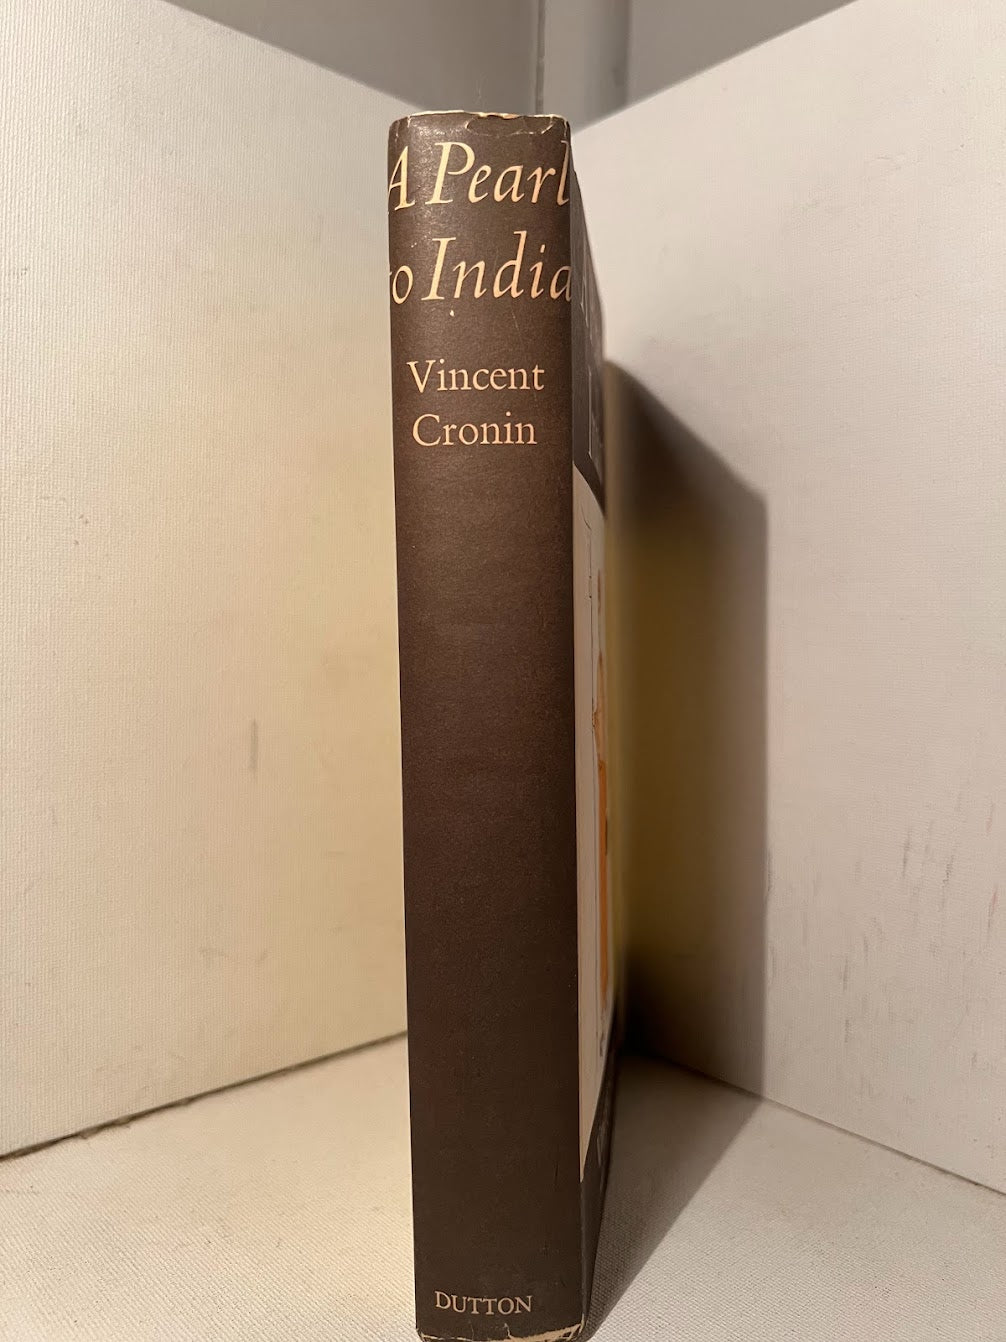 A Pearl to India by Vincent Cronin